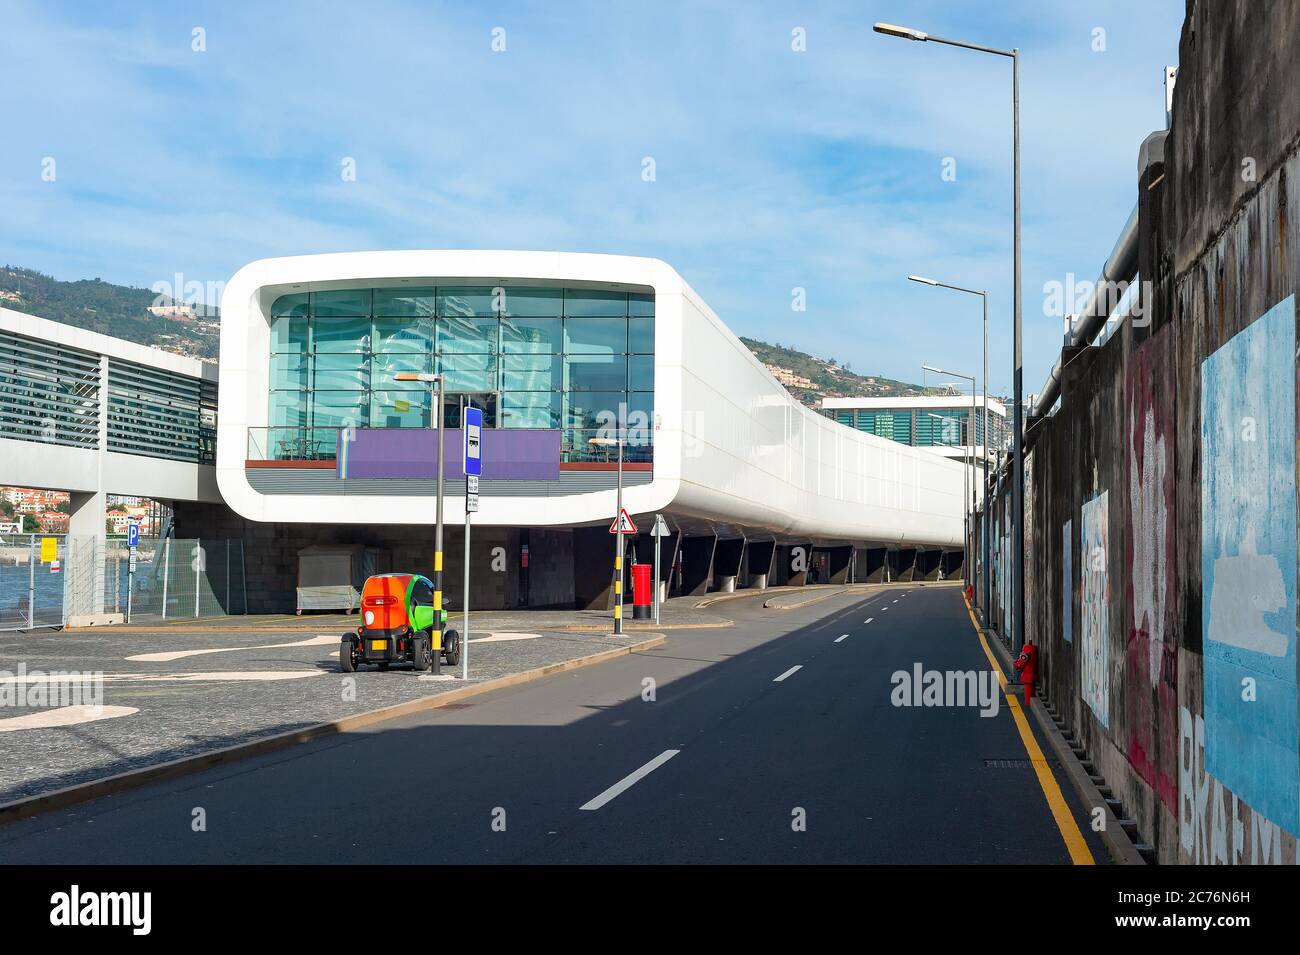 Airport terminal building of modern architecture, passage, electromobile and asphalt entry road, Funchal, Madeira island, Portugal Stock Photo